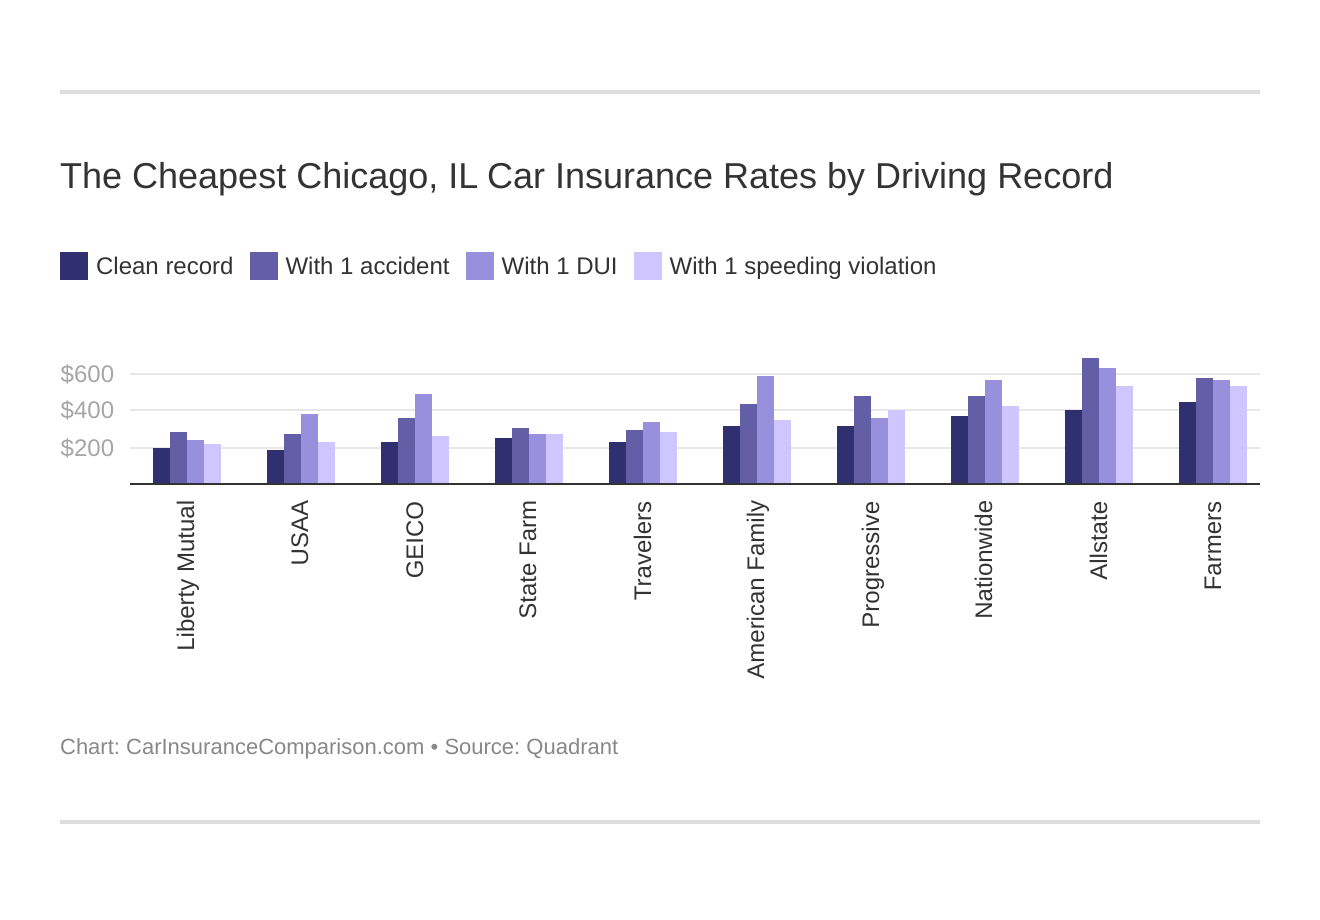 The Cheapest Chicago, IL Car Insurance Rates by Driving Record